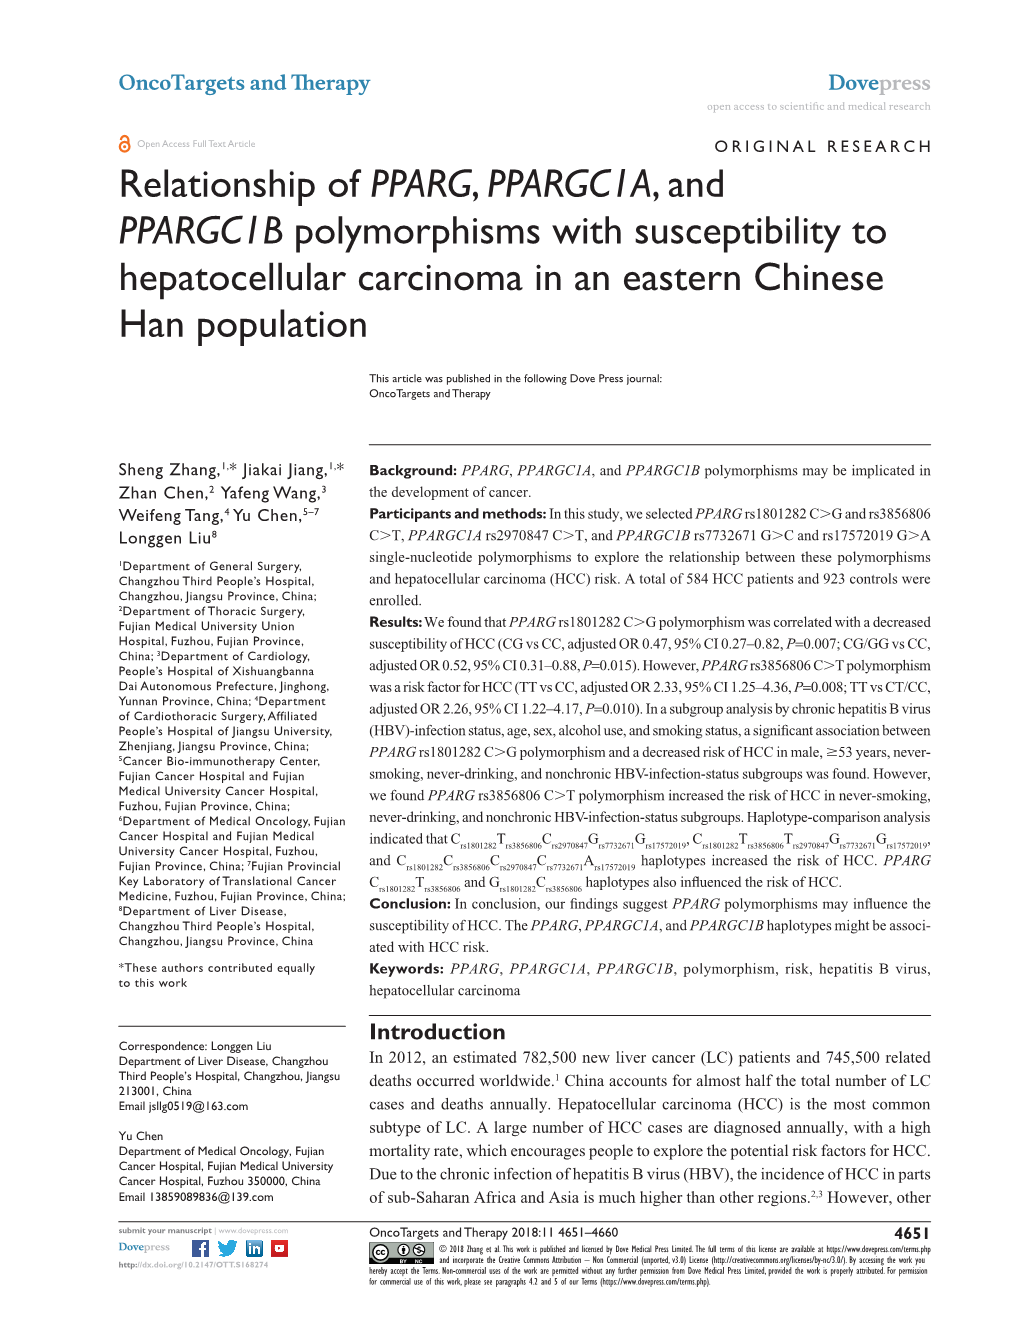 Relationship of PPARG, PPARGC1A, and PPARGC1B Polymorphisms with Susceptibility to Hepatocellular Carcinoma in an Eastern Chinese Han Population